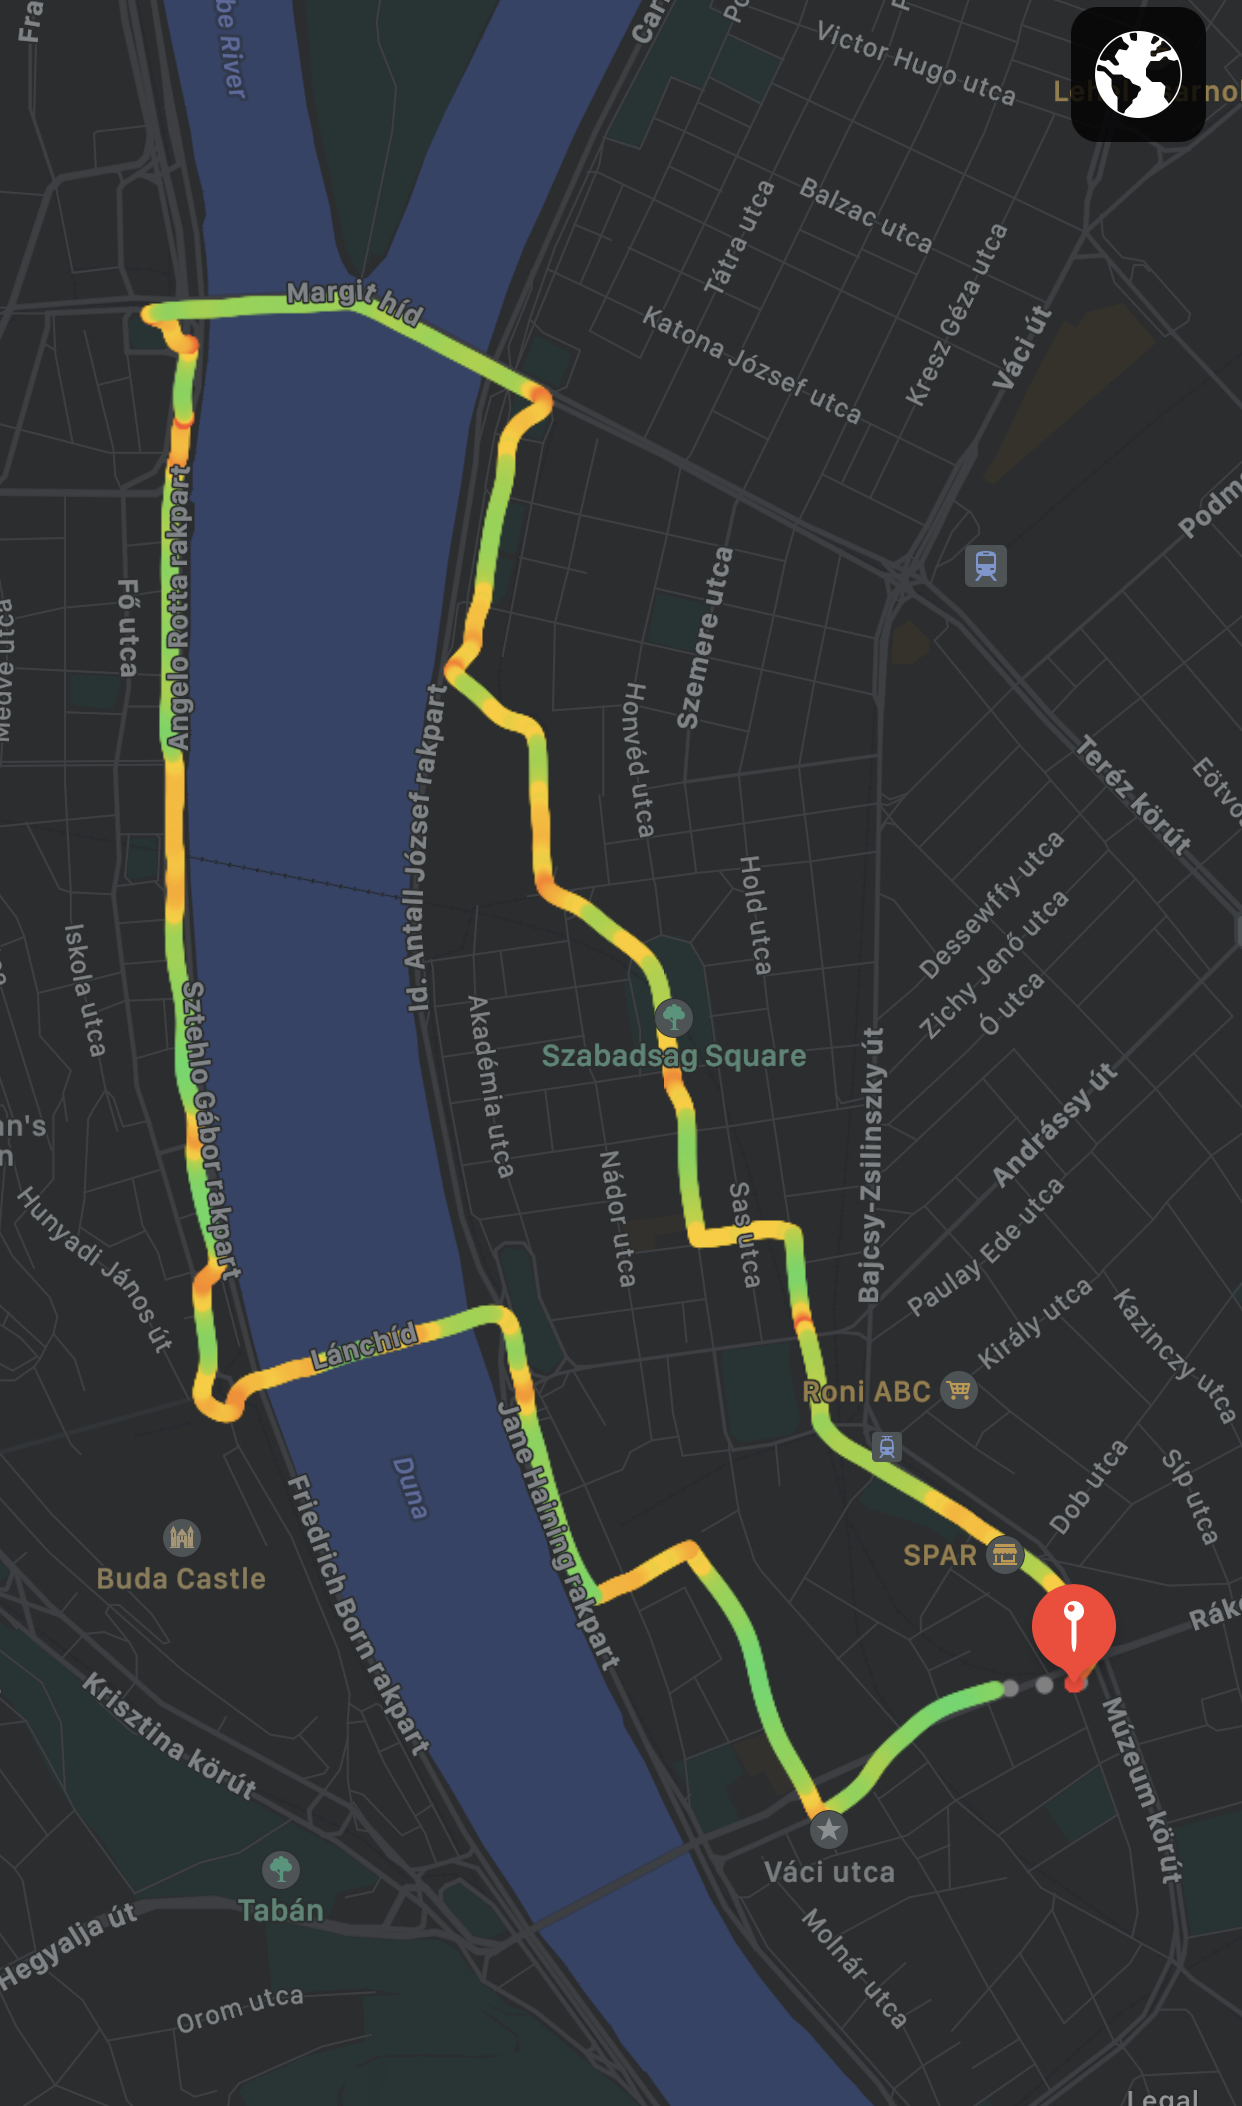 Map of Budapest from Apple's Fitness app displaying a workout route